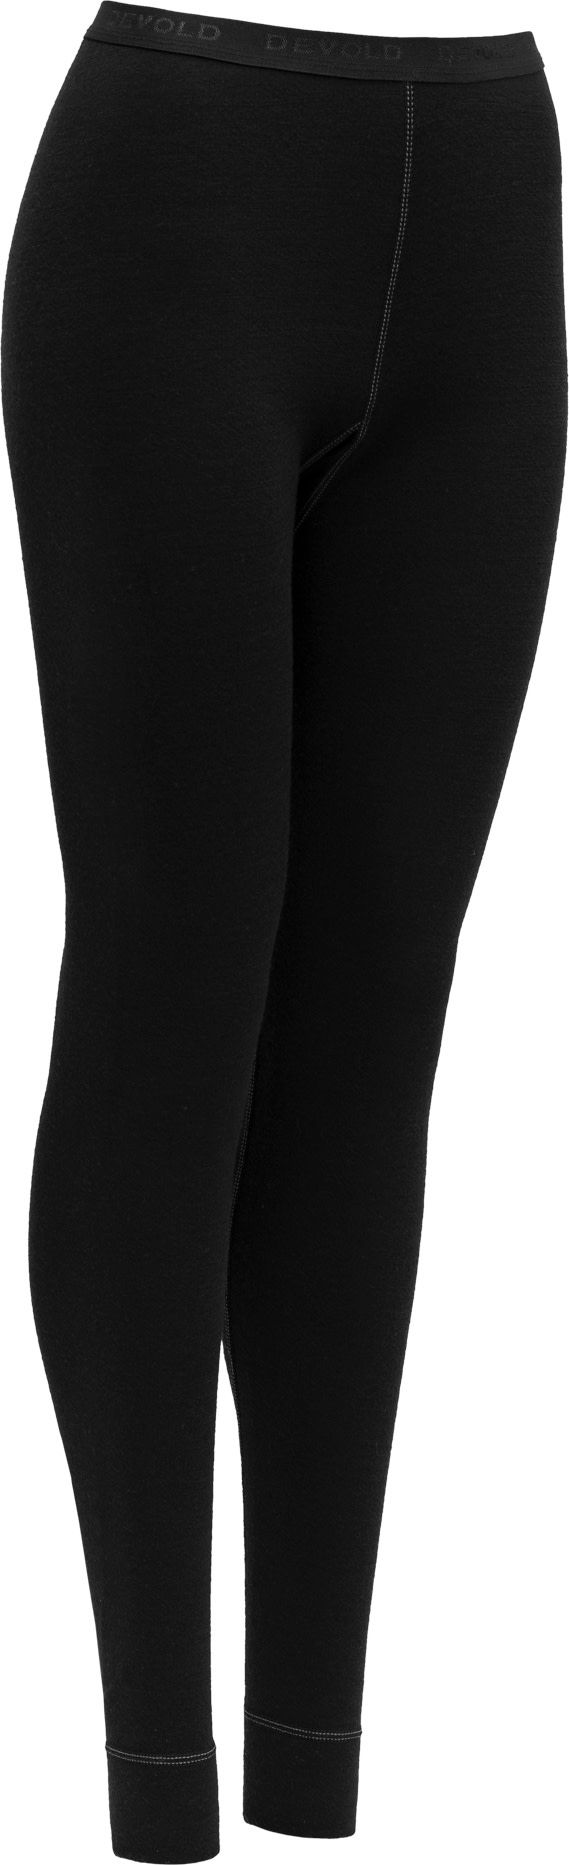 Women's Expedition Long Johns BLACK Devold